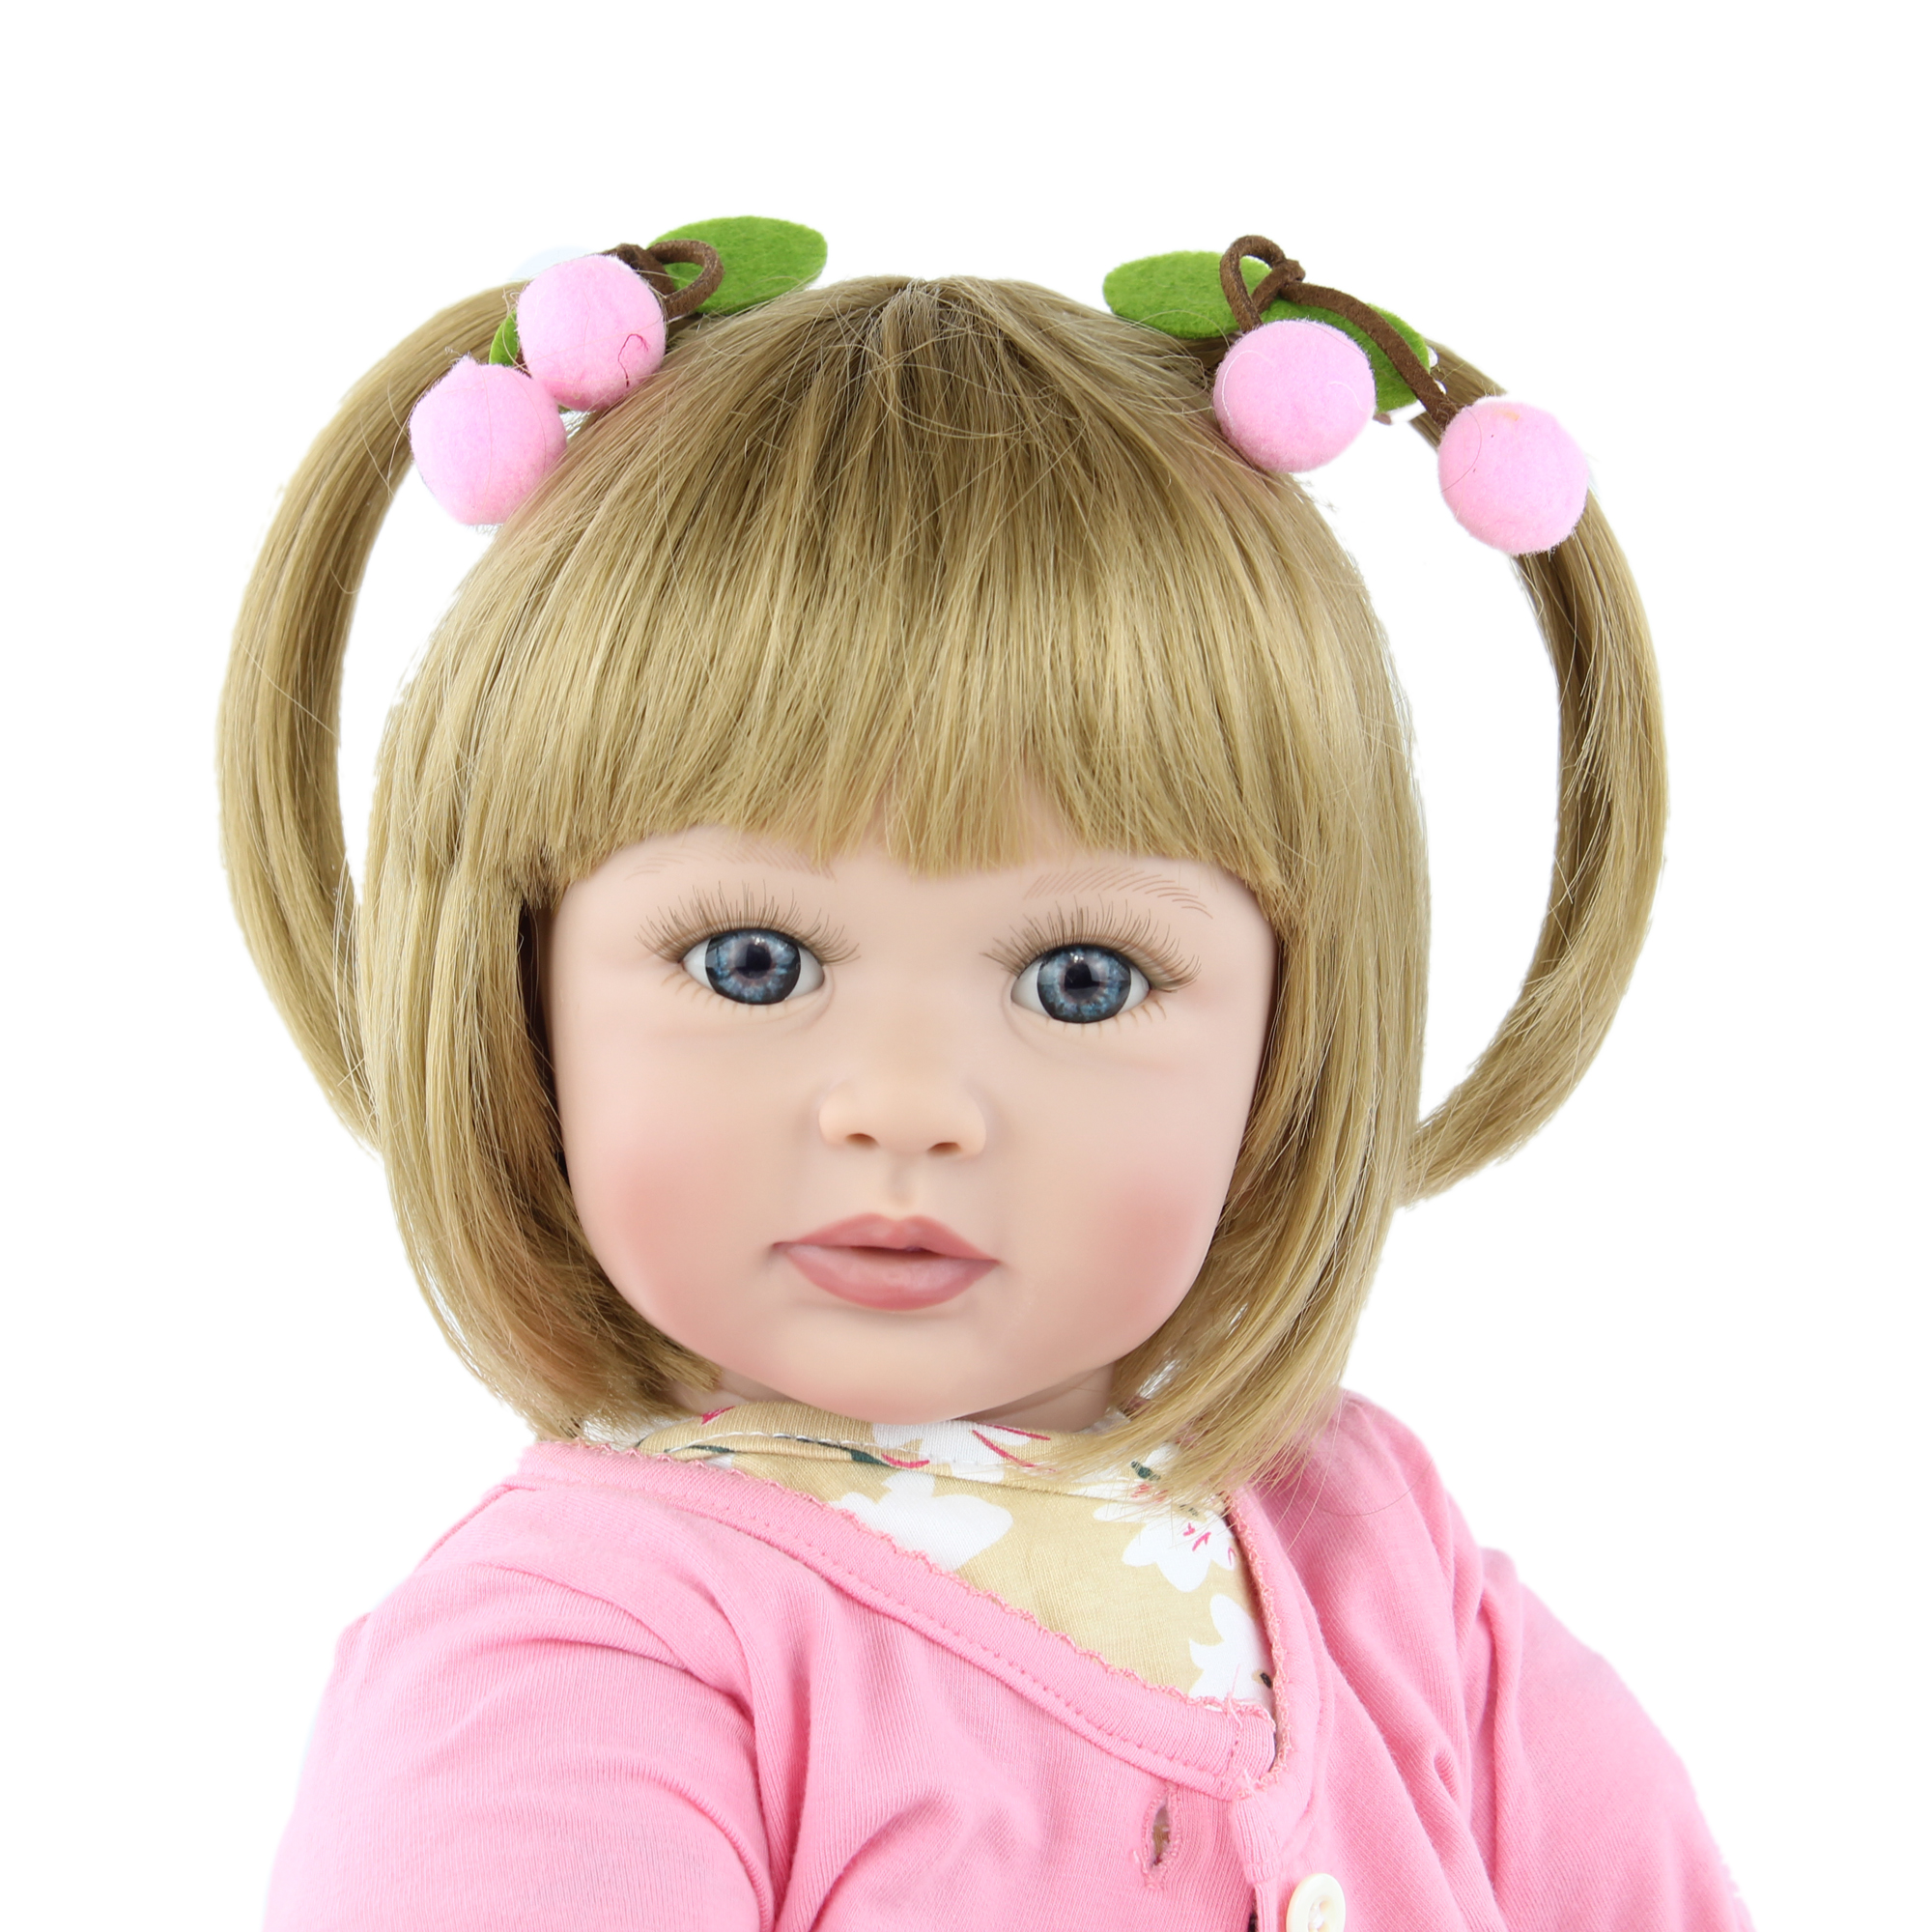 60 CM Soft Silicone Reborn Baby Doll Toys For Girl Blonde Princess Toddler Boneca Lovely Birthday Christmas Gift Brinquedos